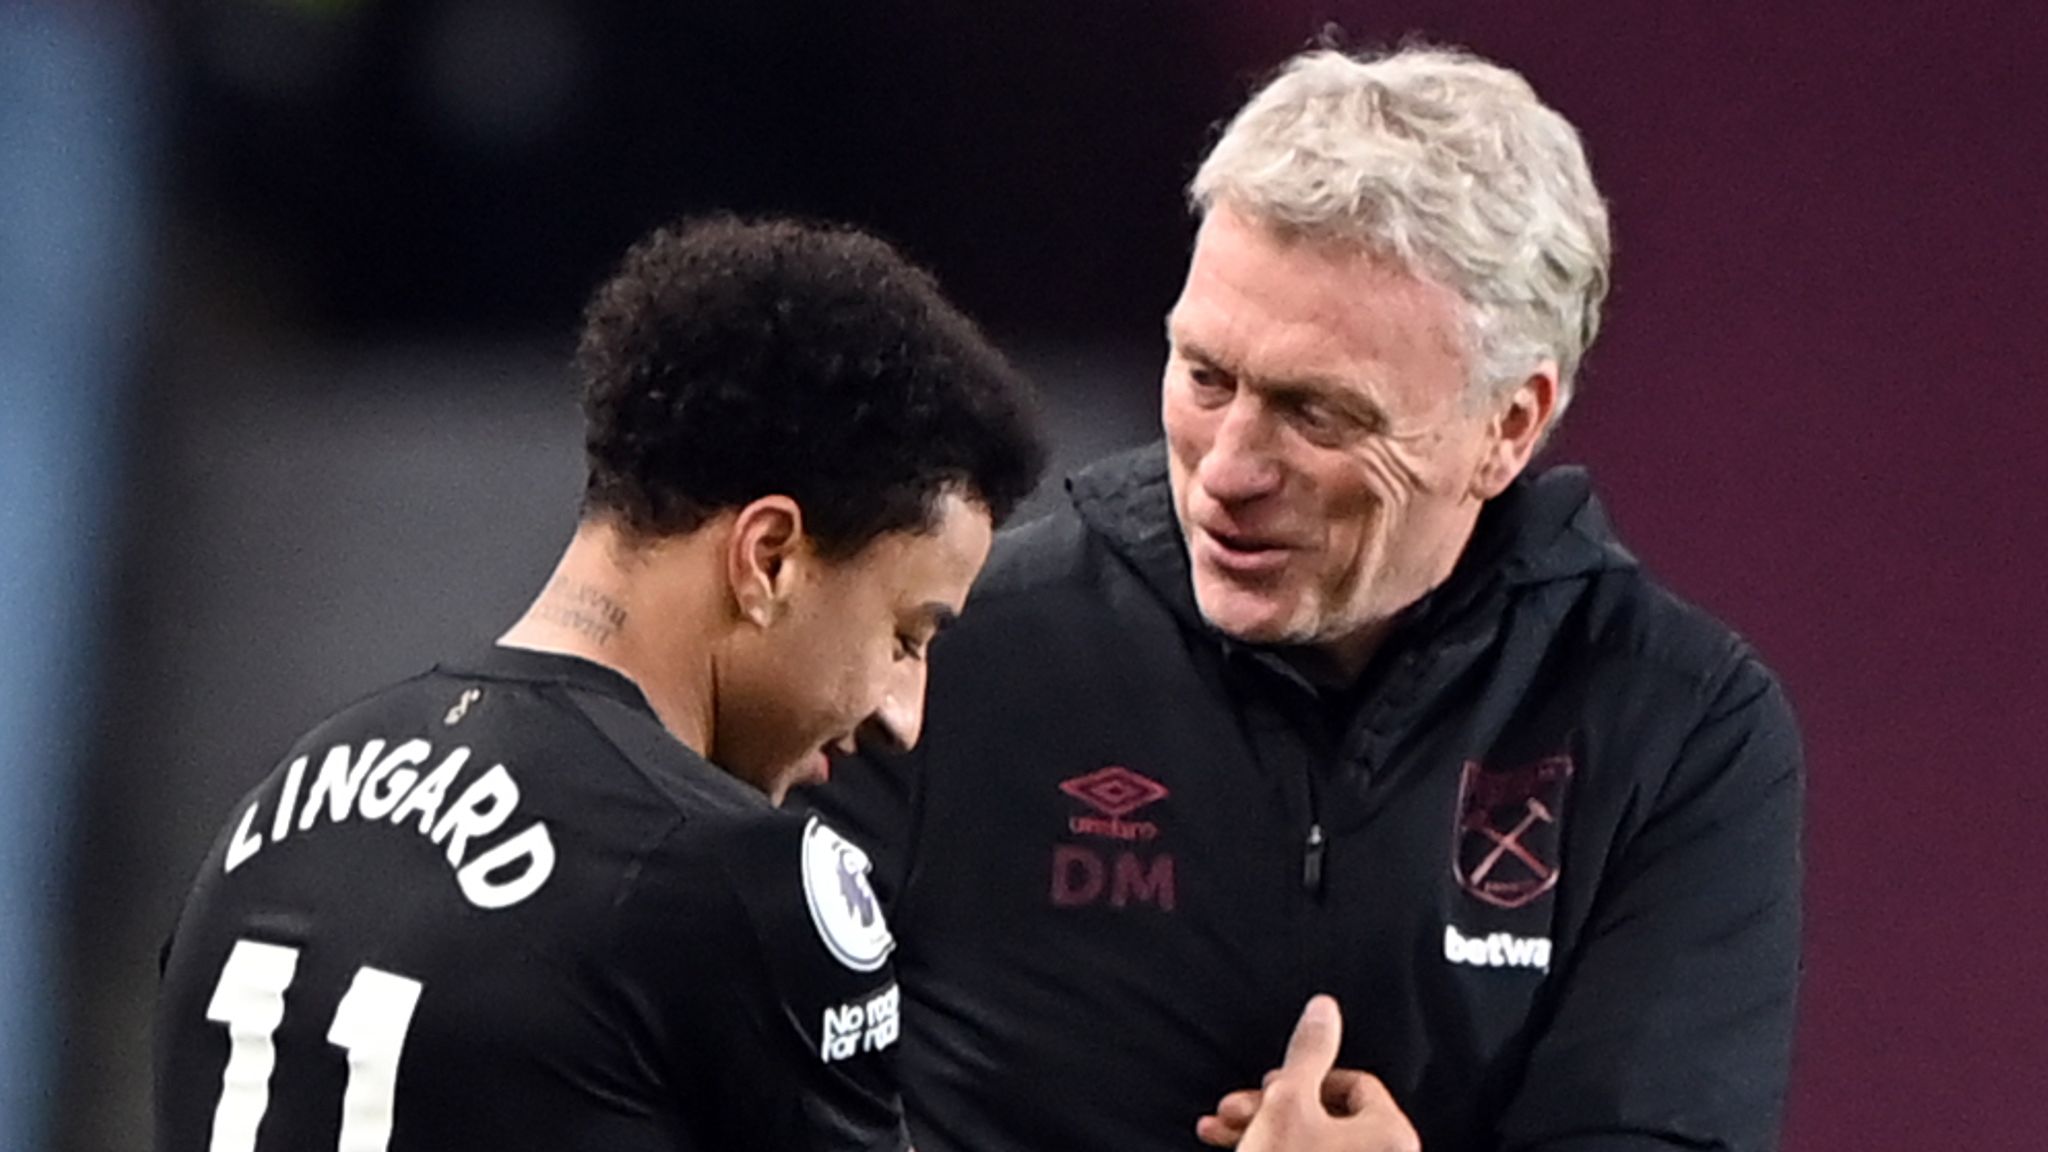 On trial! Jesse Lingard to play in West Ham friendly as David Moyes  consider offering short-term deal